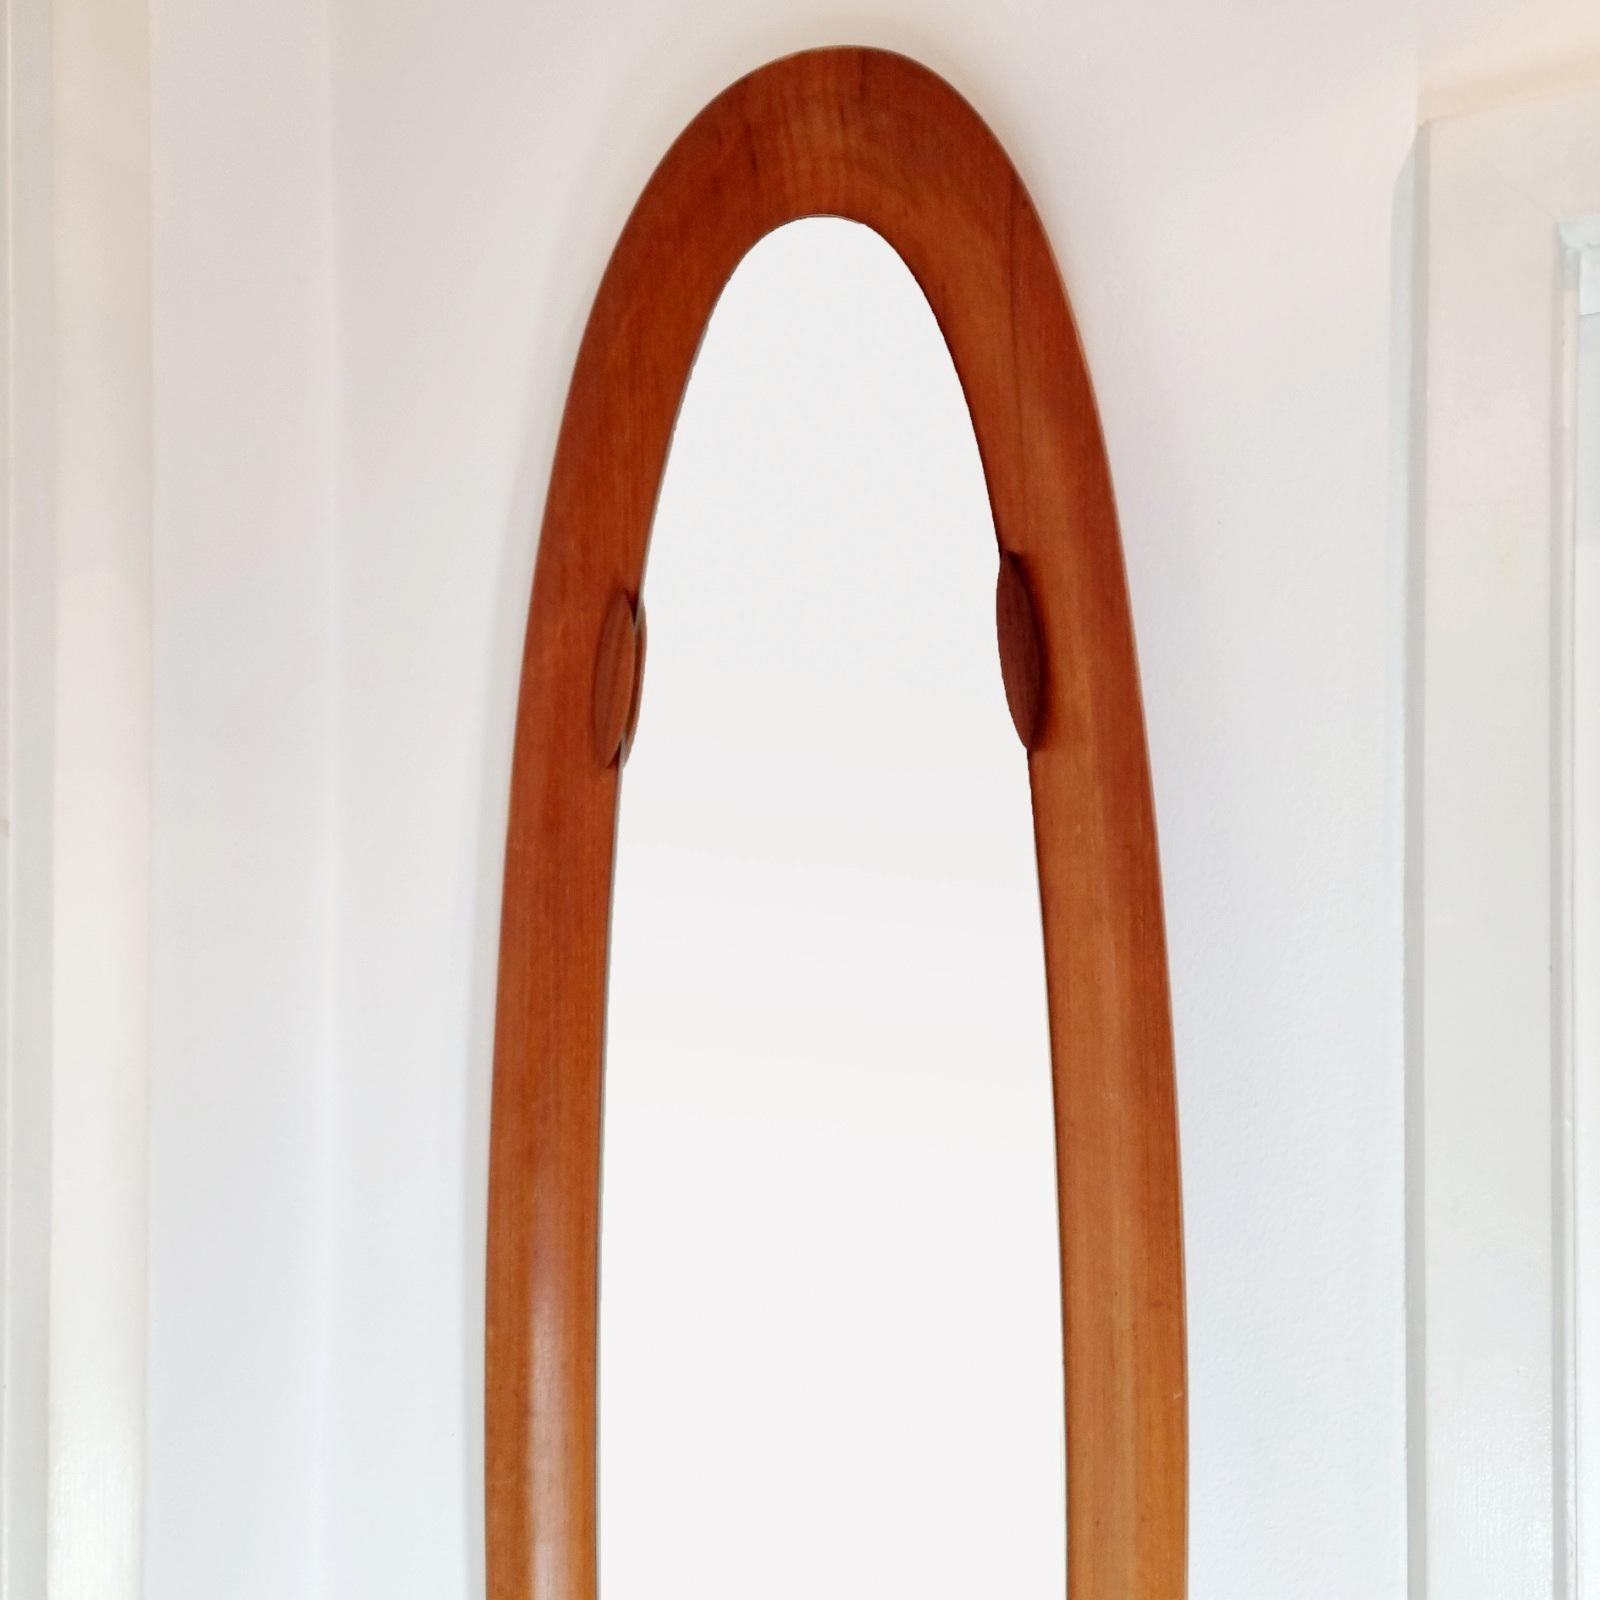 Classic Italian oval wall mirror from the 60s era. Designed by Campo e Graffi.
Teak material
In excellent vintage condition.